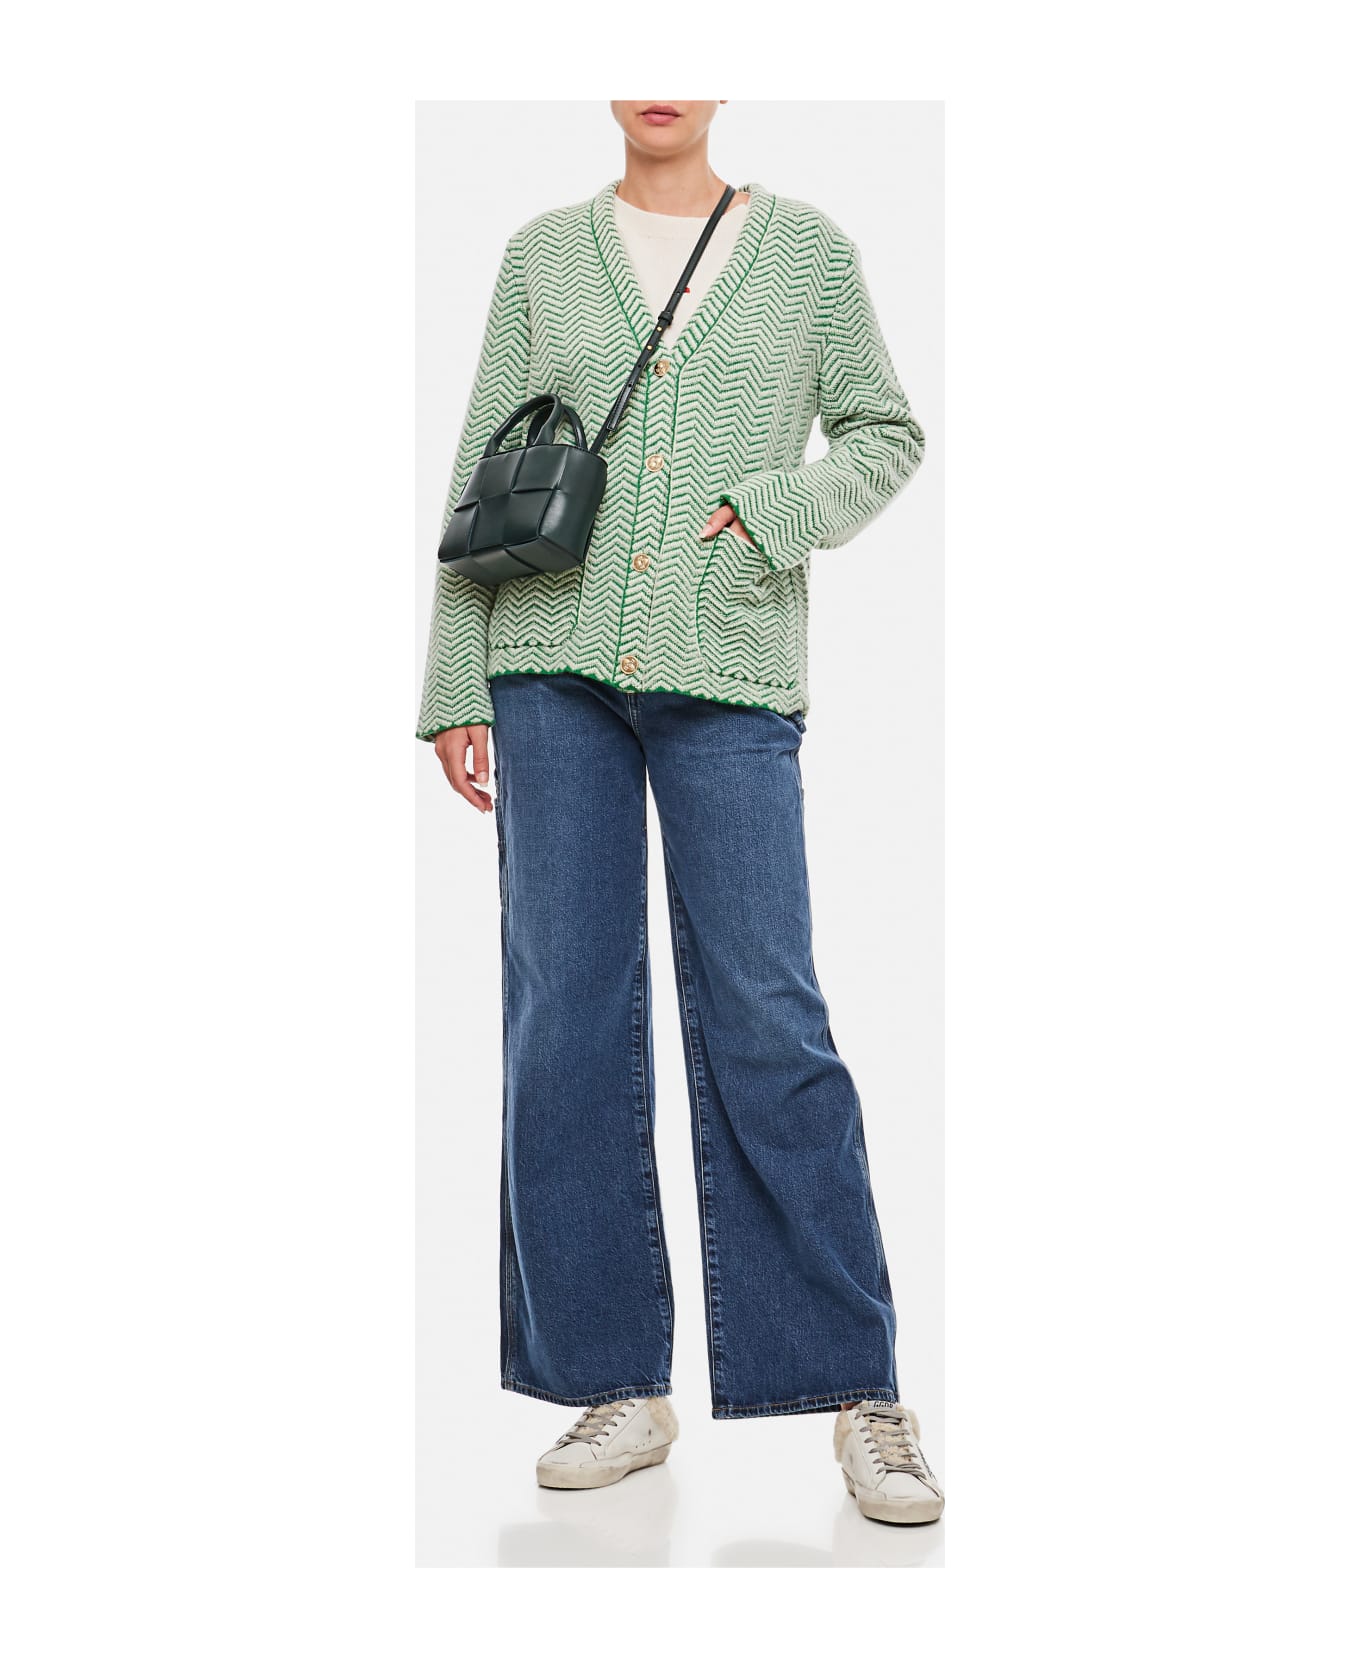 Barrie Cashmere Cardigan Jacket - Green